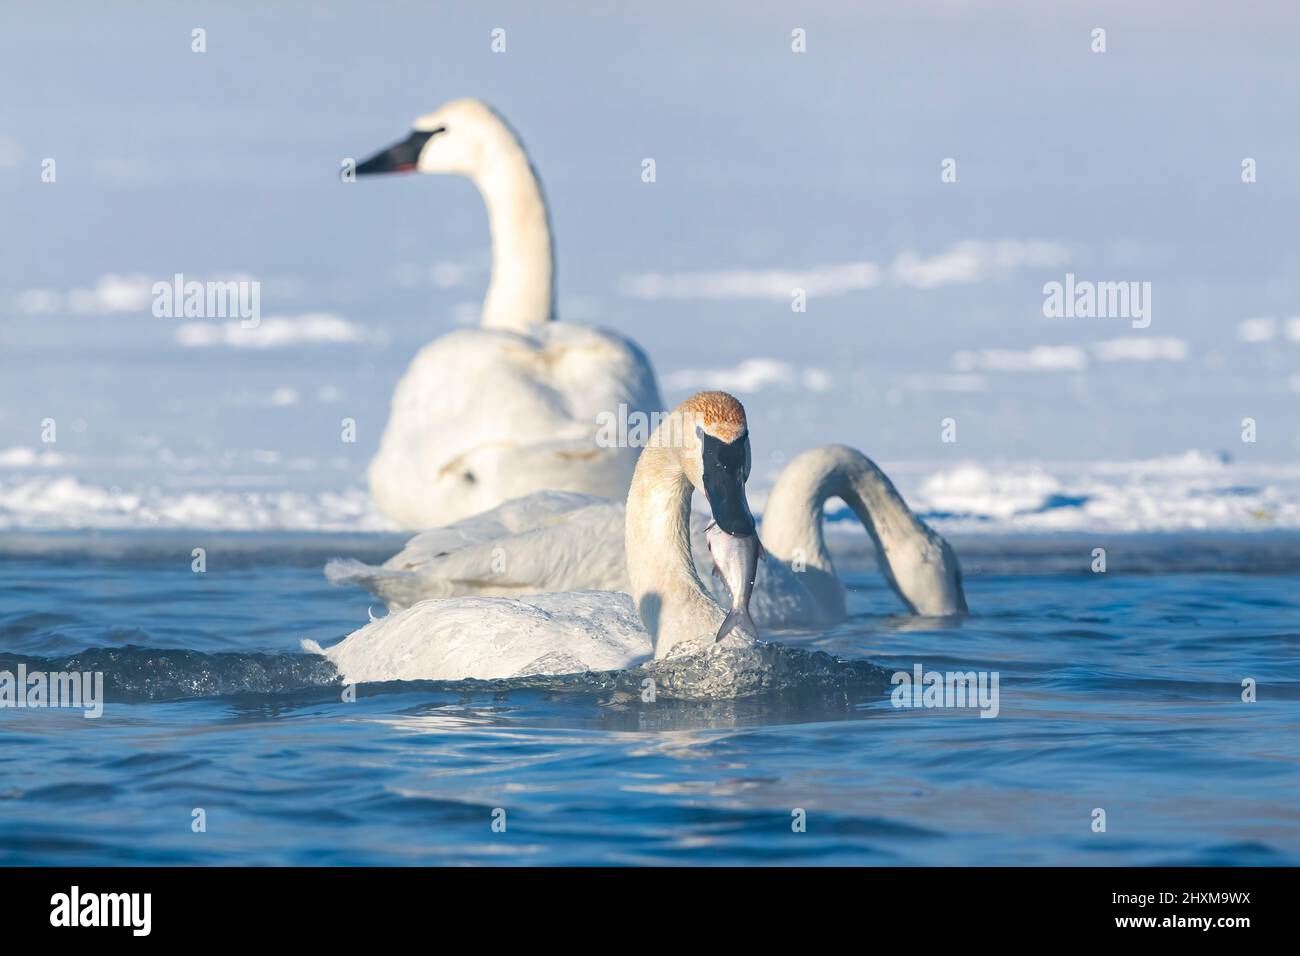 Trumpeter swan (Cygnus buccinator) eating a fish from St. Croix river, WI, USA, by Dominique Braud/Dembinsky Photo Assoc Stock Photo